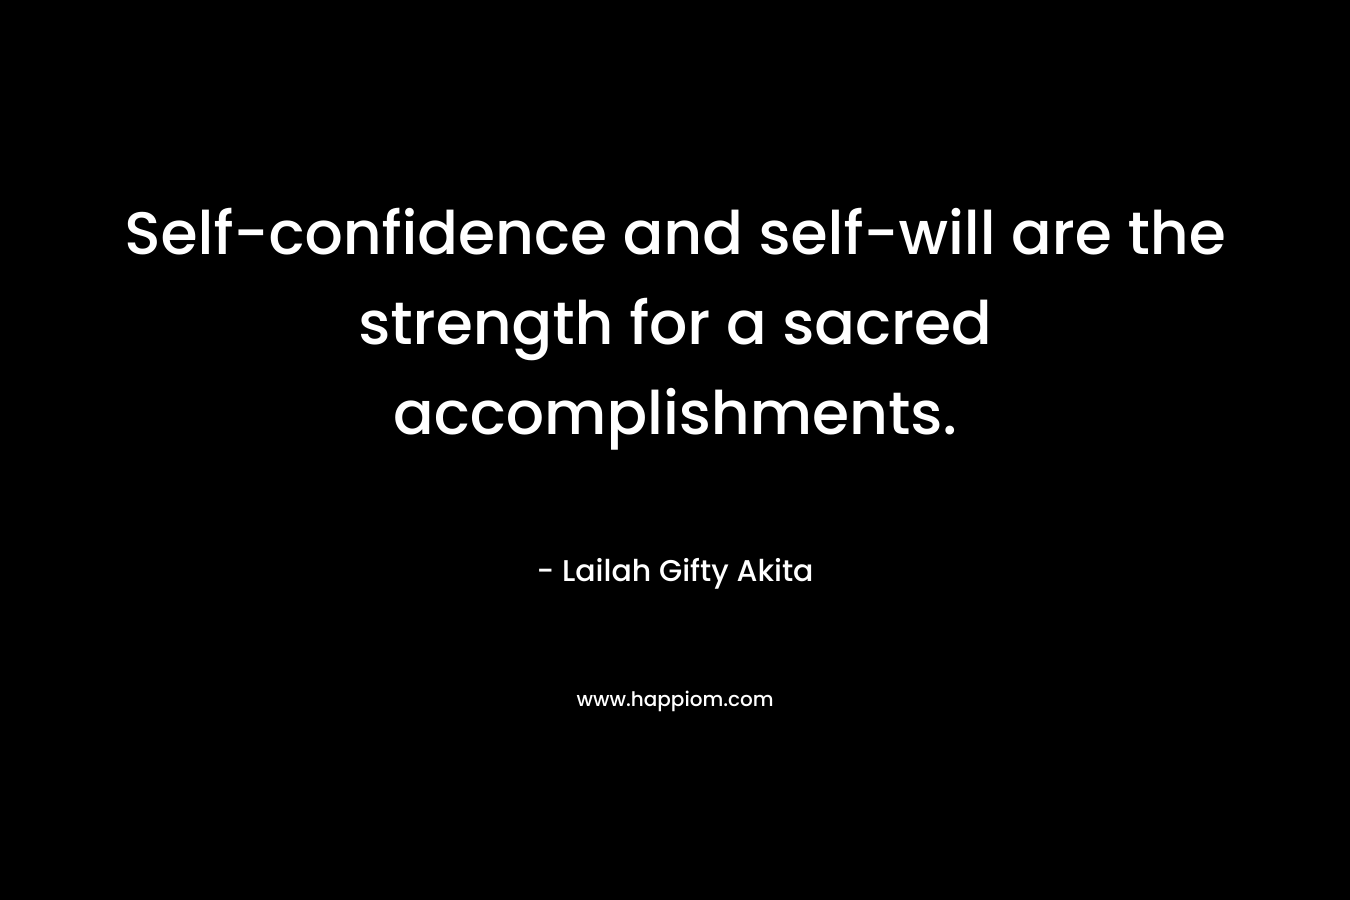 Self-confidence and self-will are the strength for a sacred accomplishments. – Lailah Gifty Akita